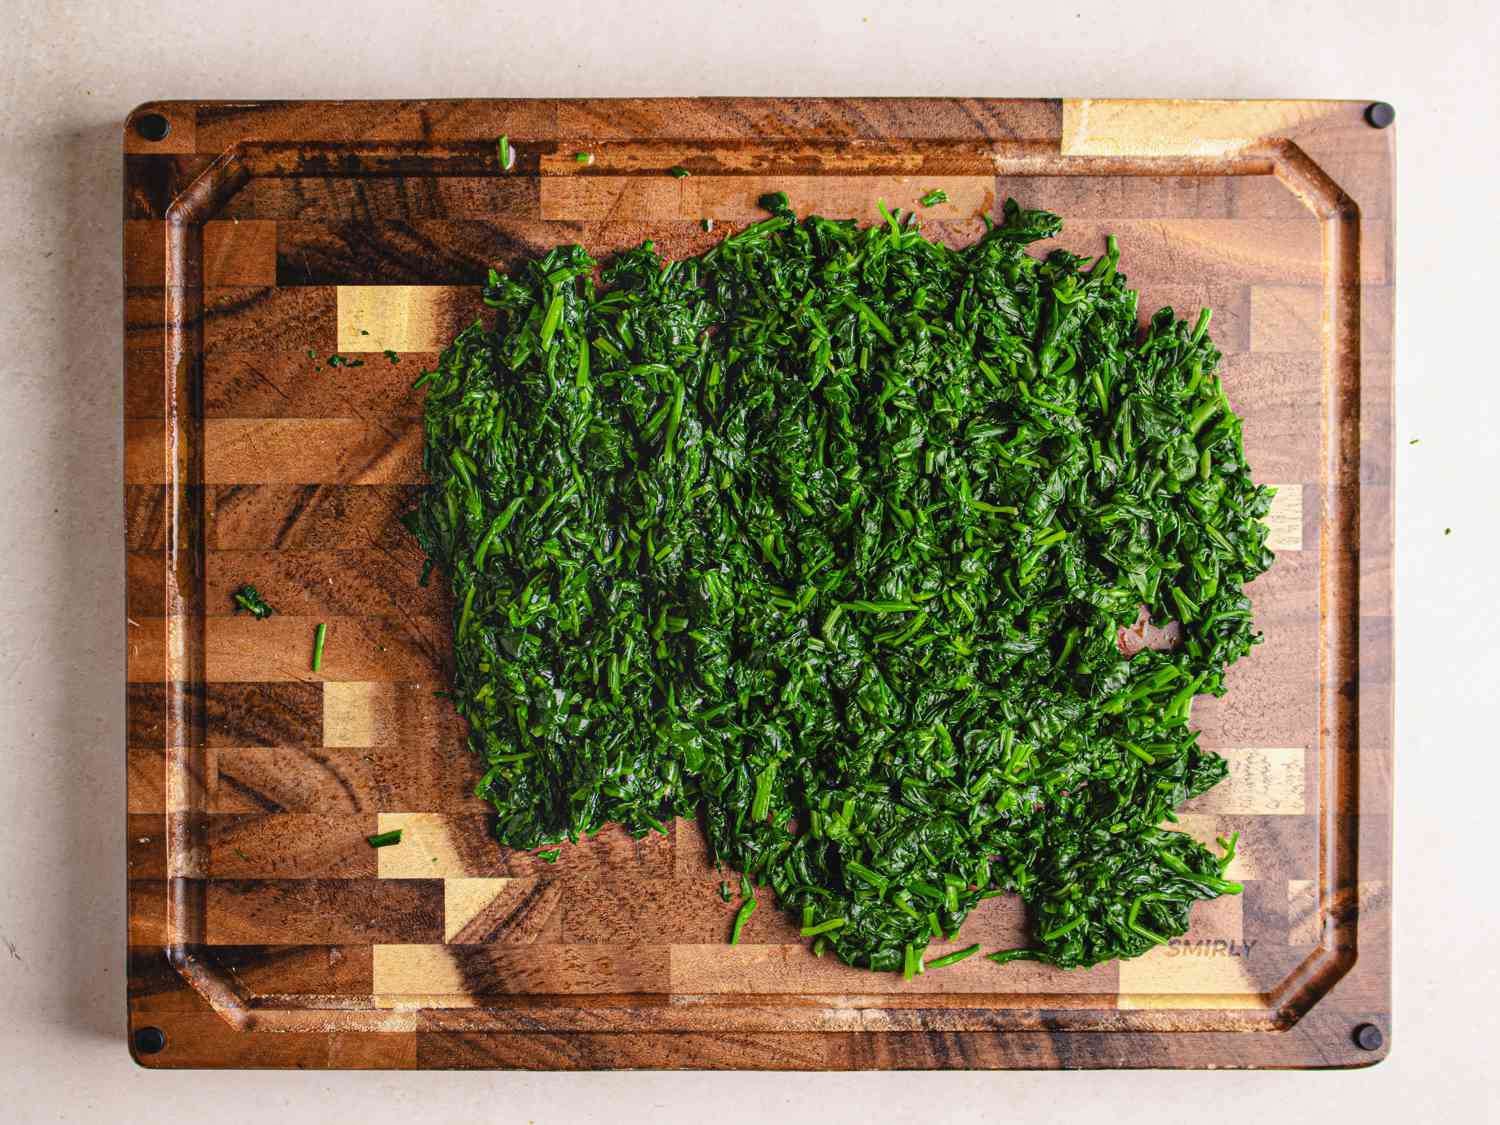 Overhead view of greens chopped on a cutting board